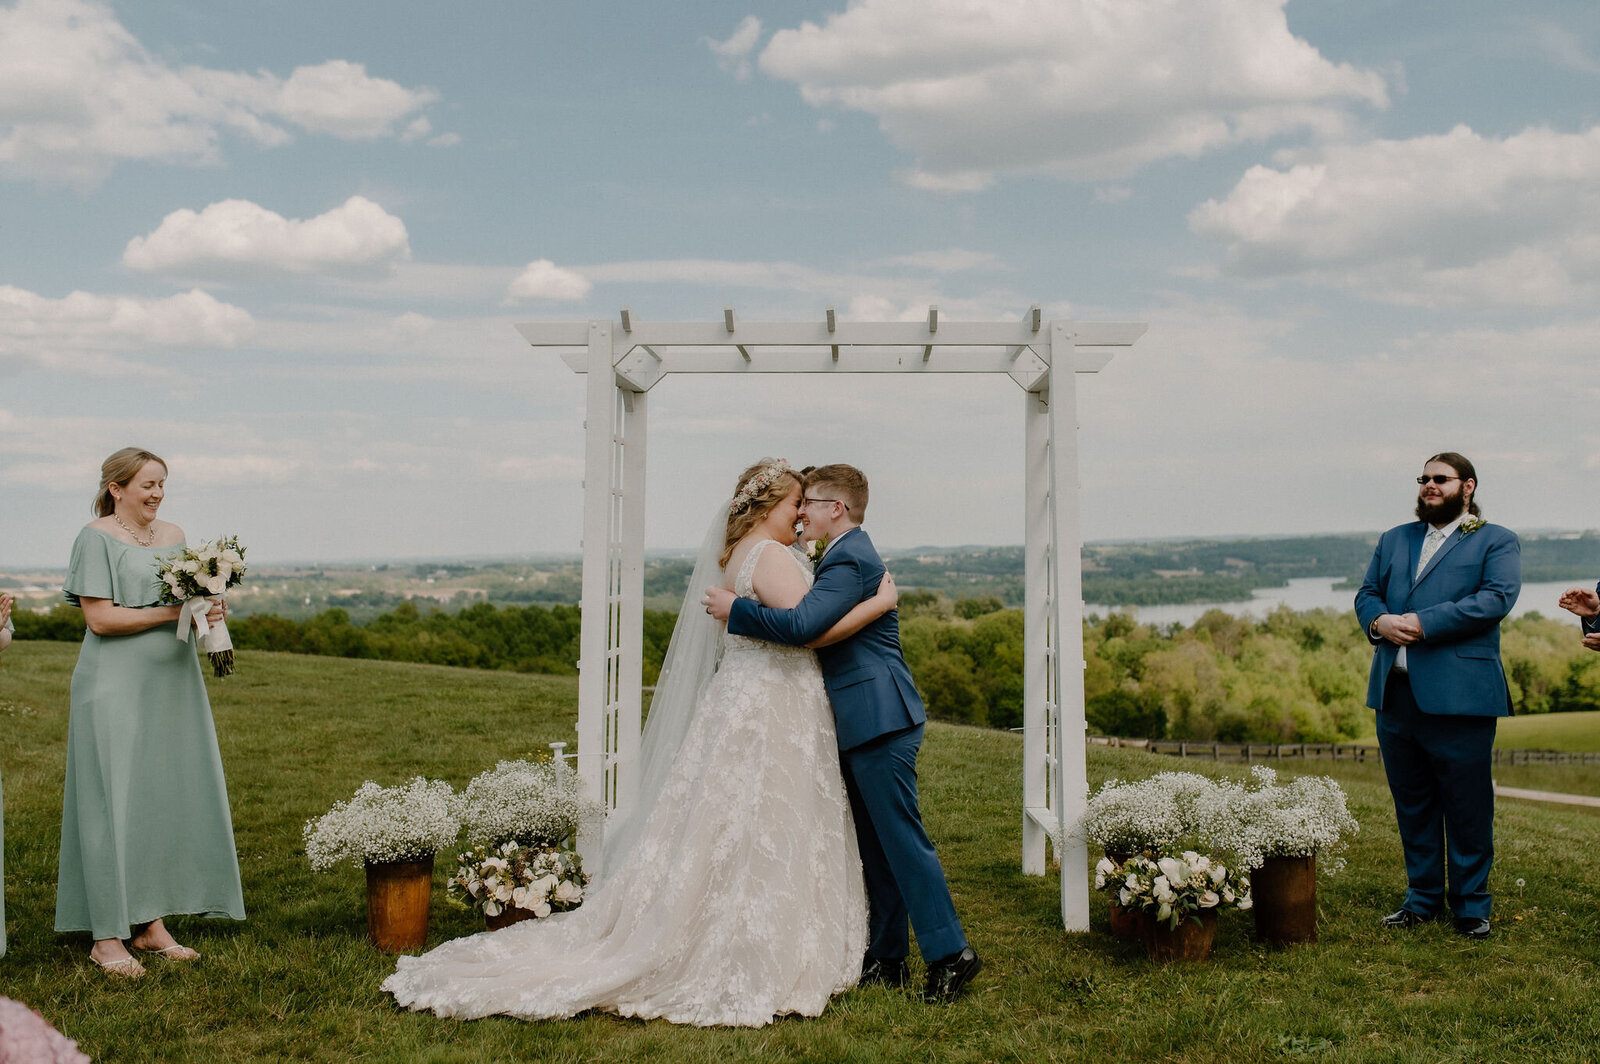 joyful couple embracing during outdoor wedding ceremony at Lauxmont Farms